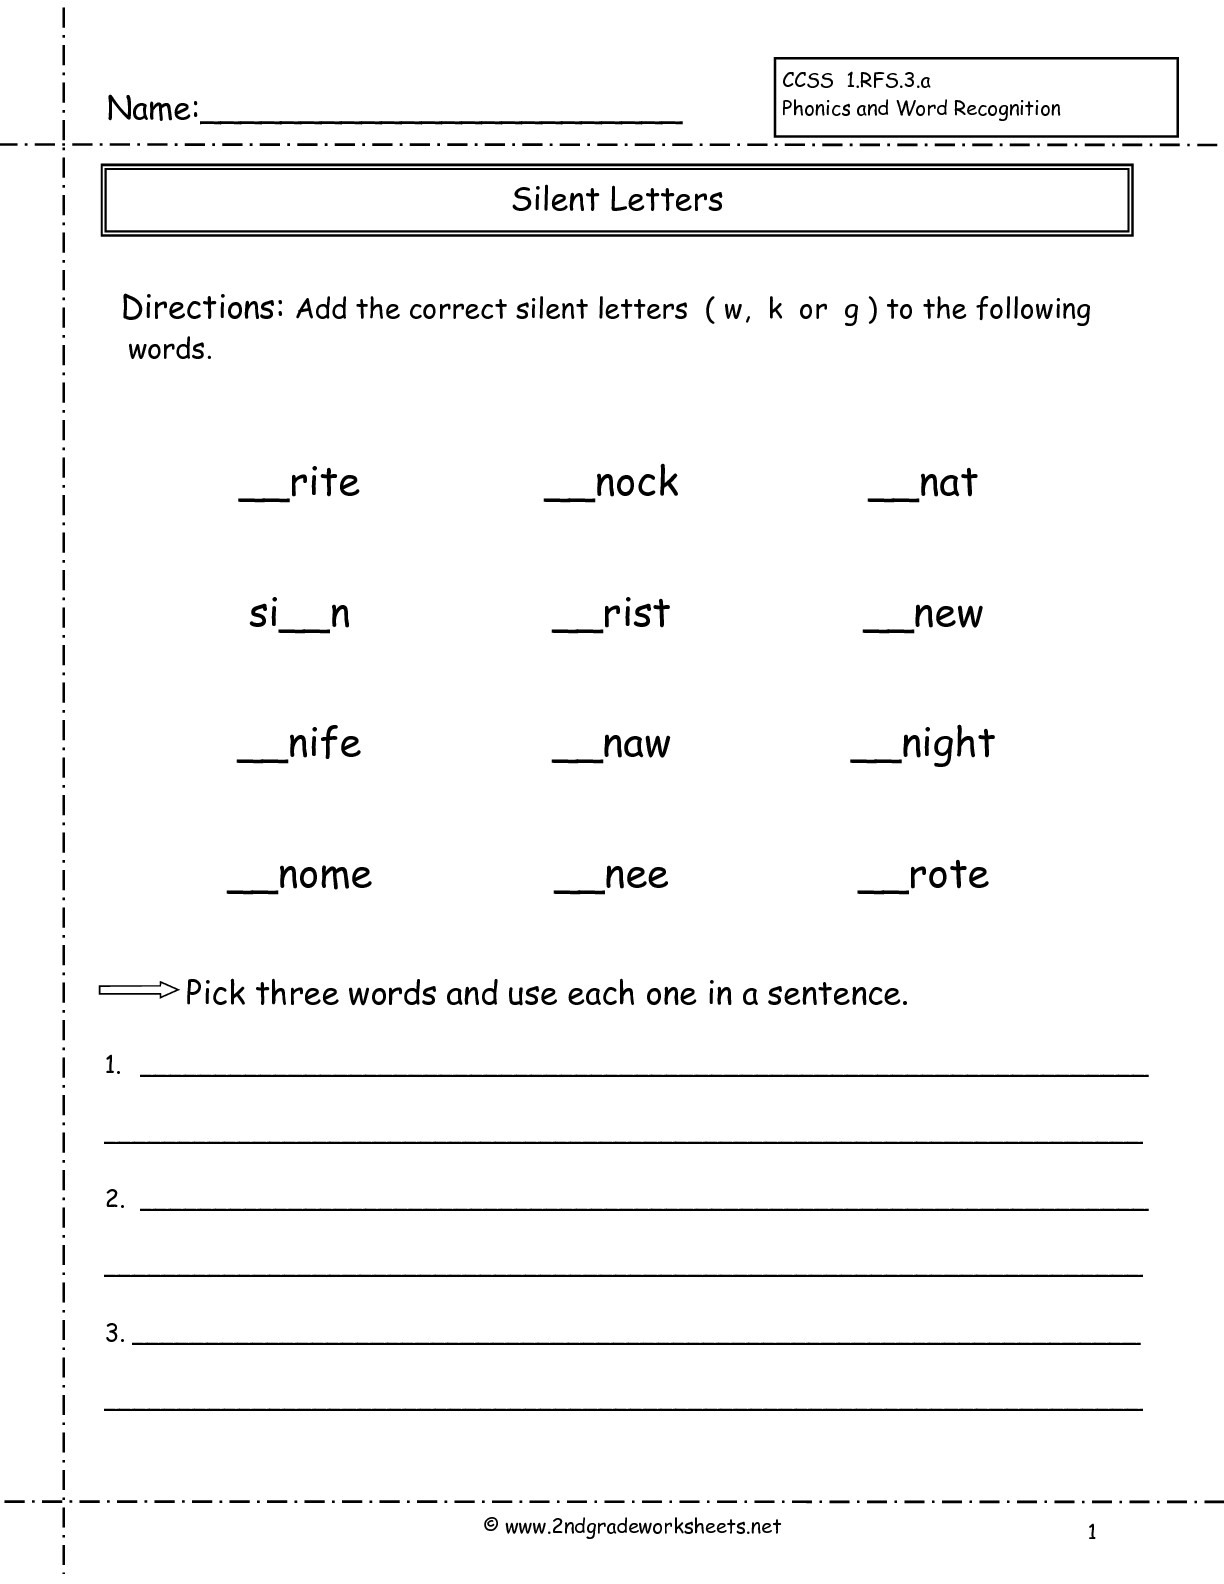 2nd grade phonics worksheets db excelcom